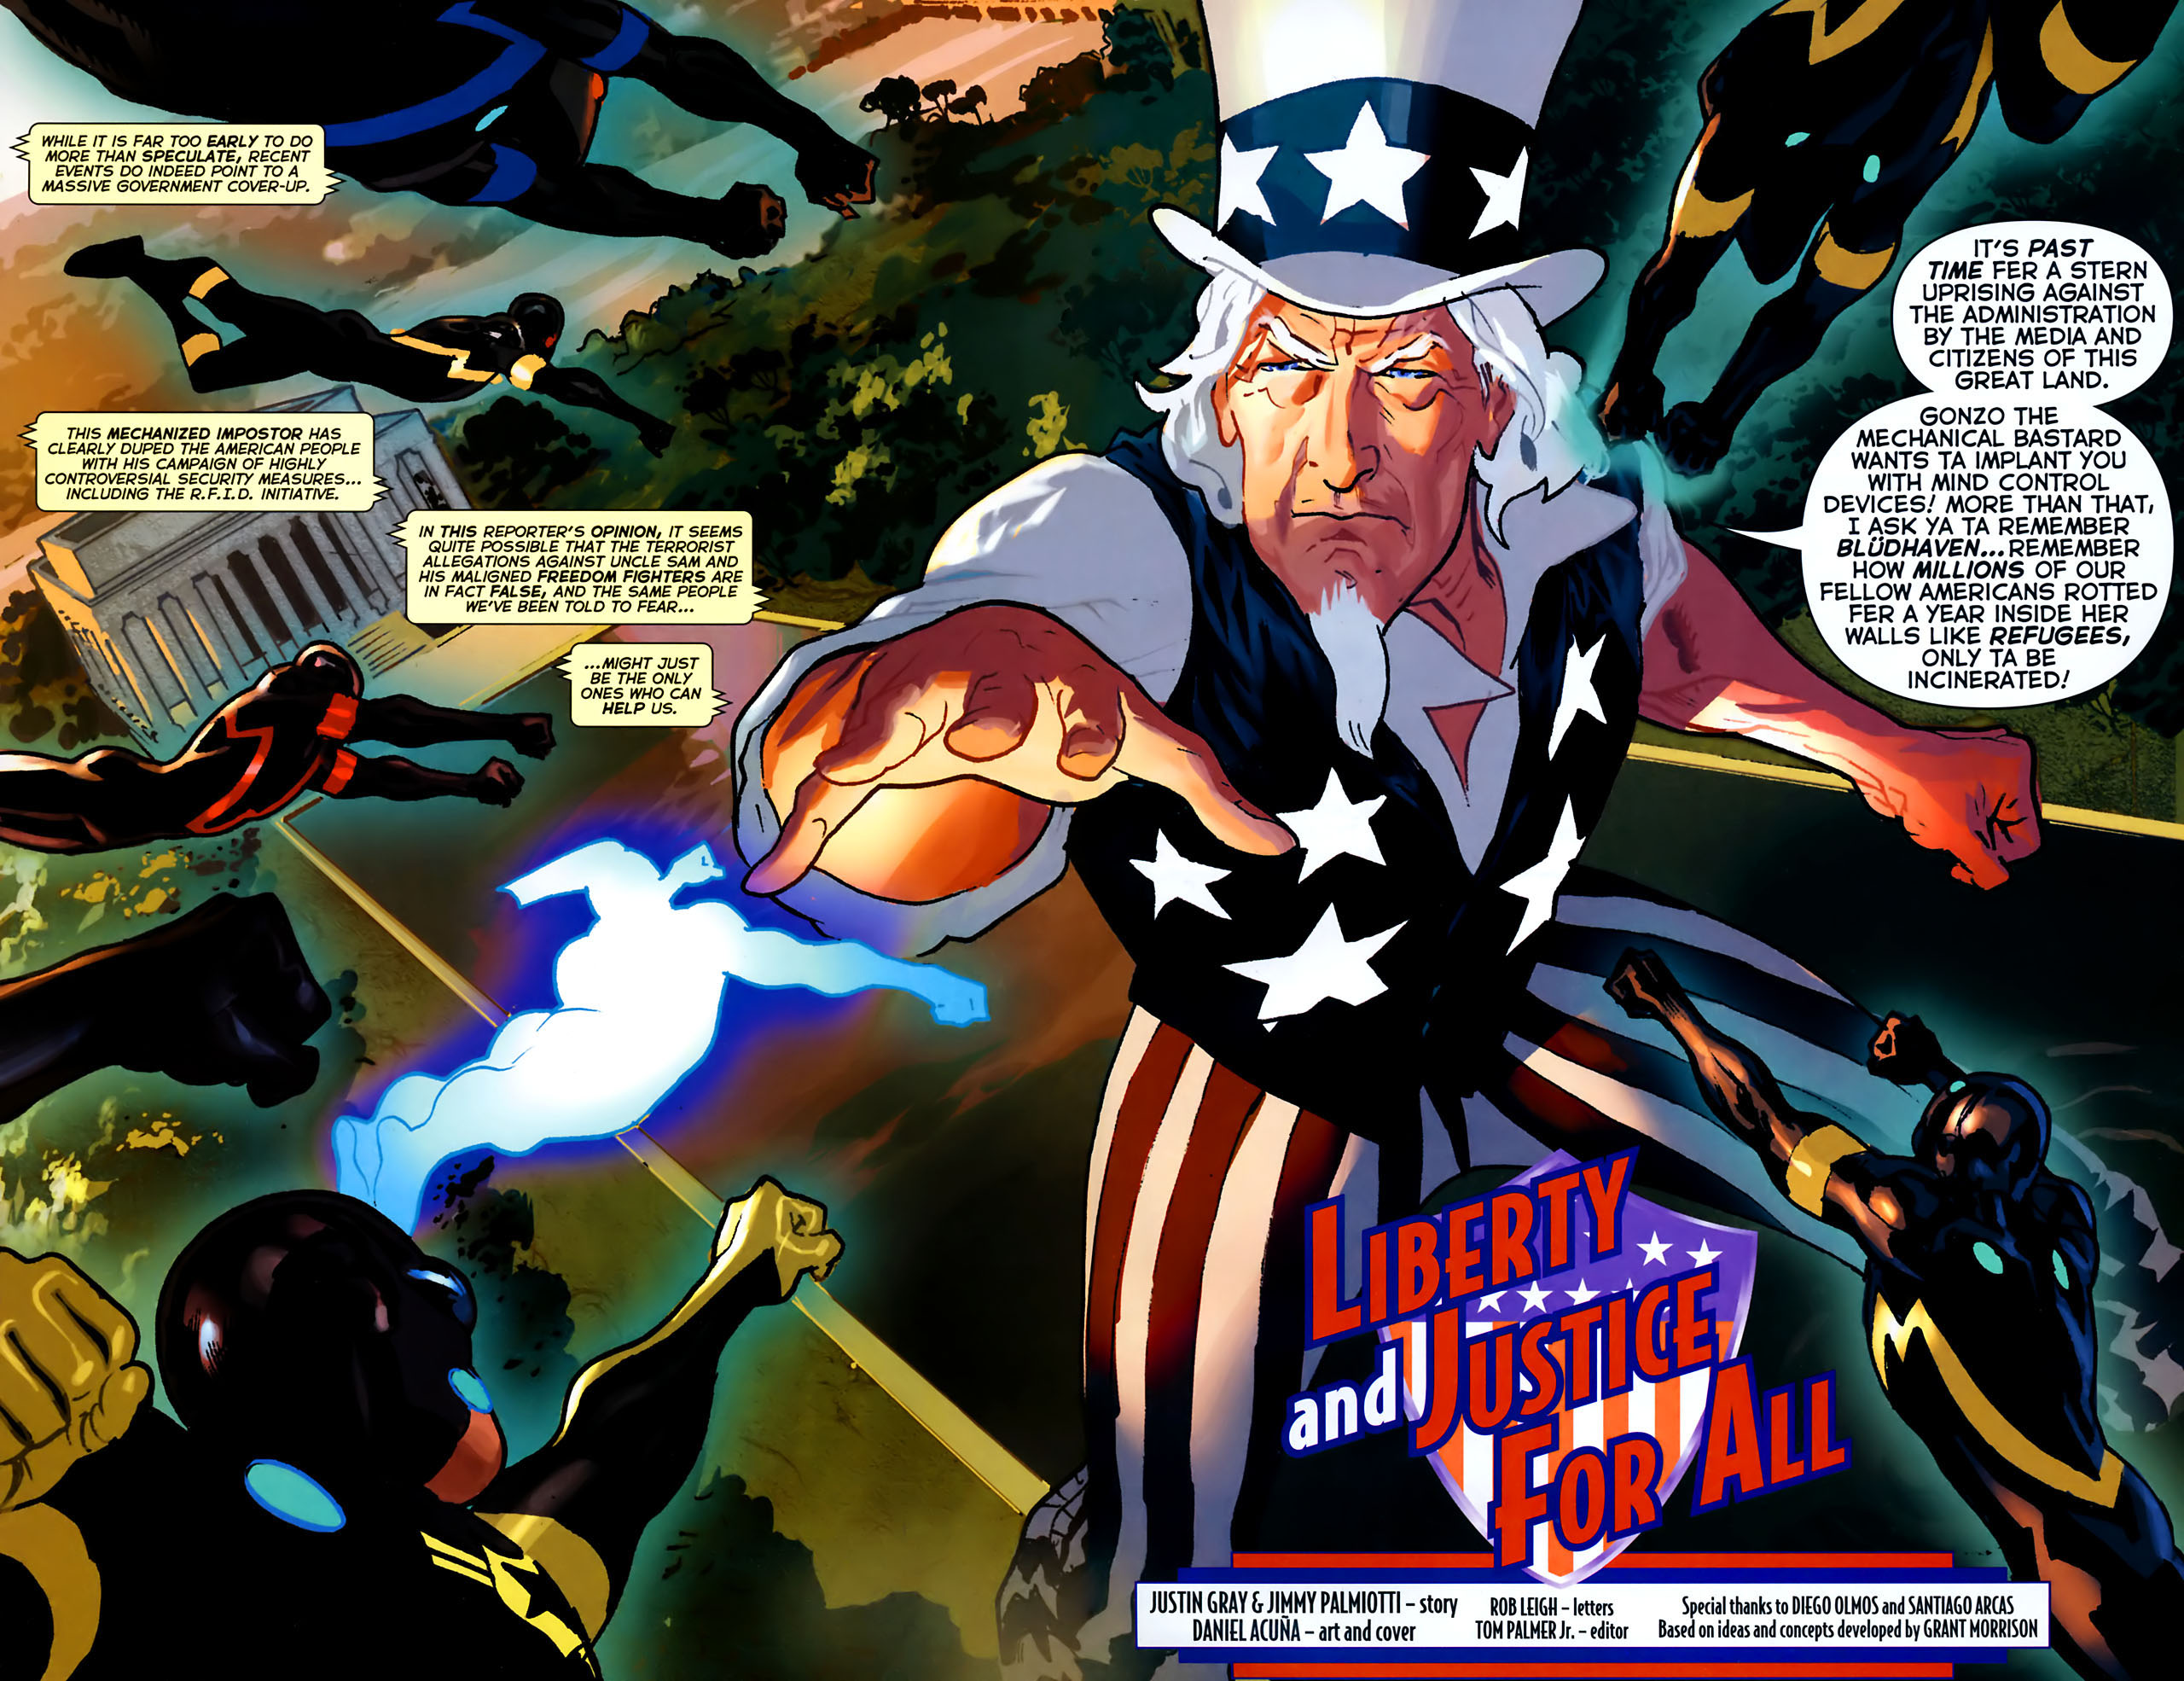 Uncle Sam And The Freedom Fighters #5